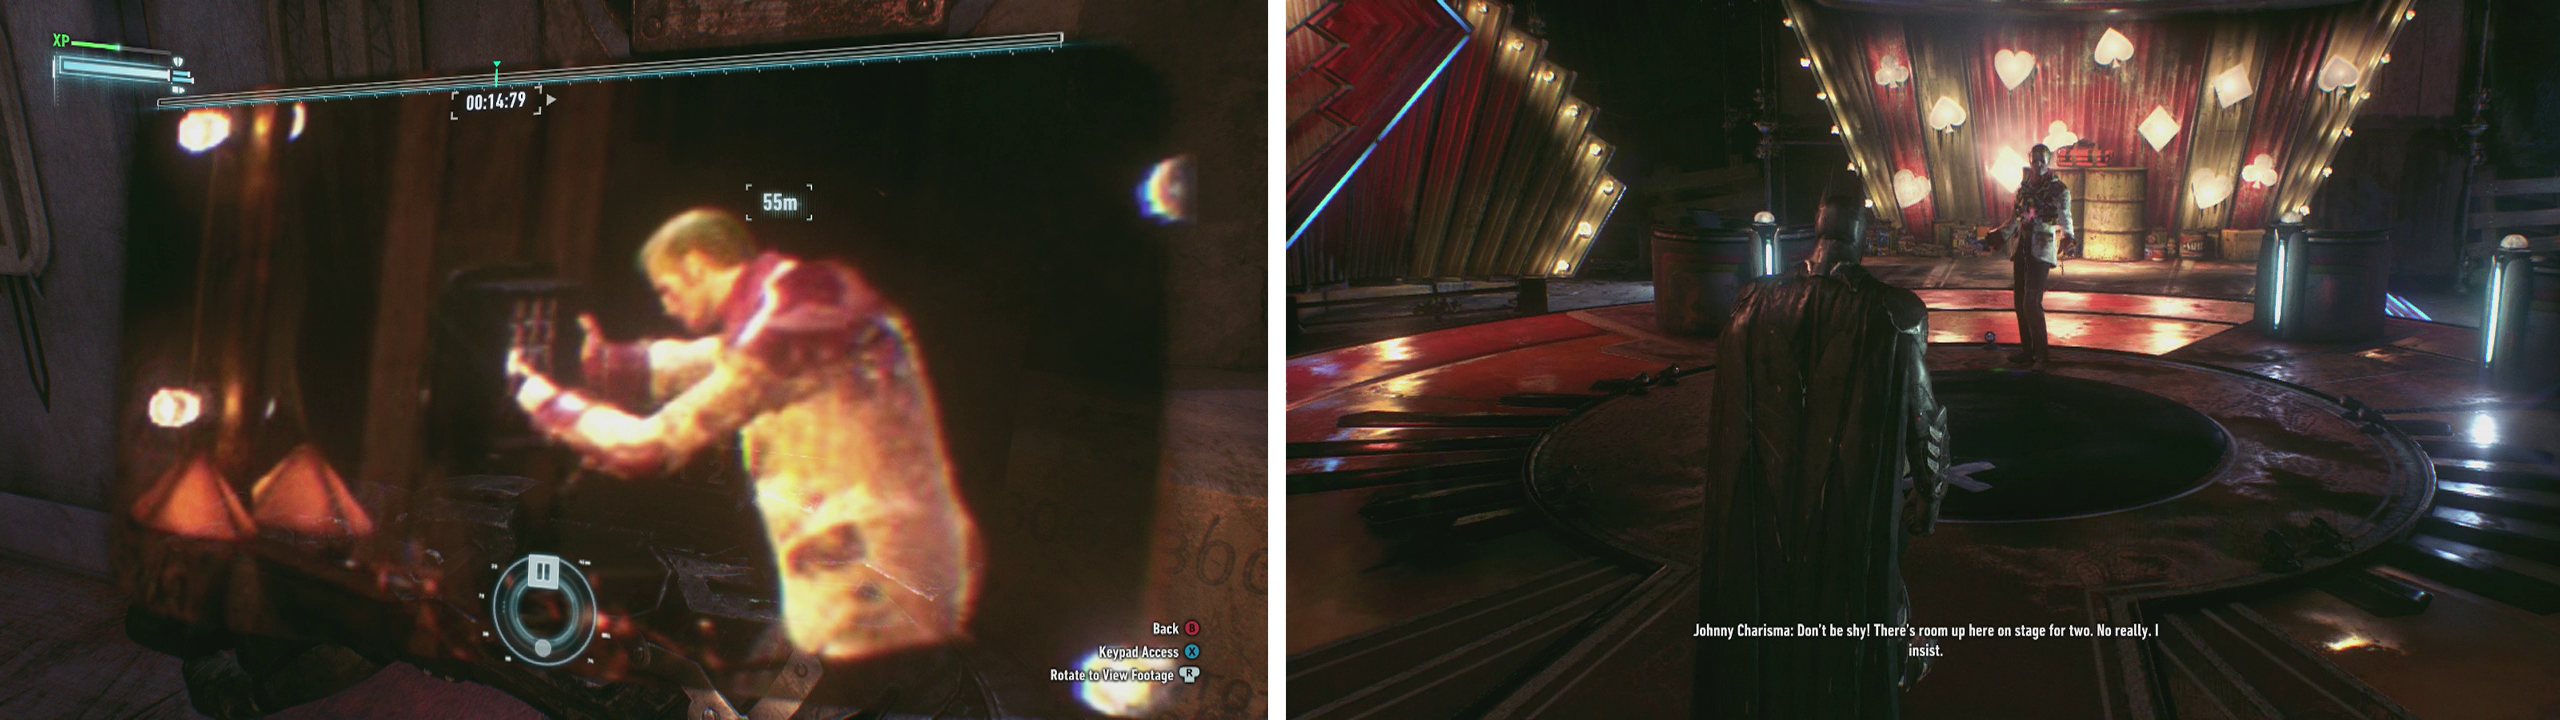 In the video look in the mirror to find the pass code (left). Approach the fellow on the stage (right).